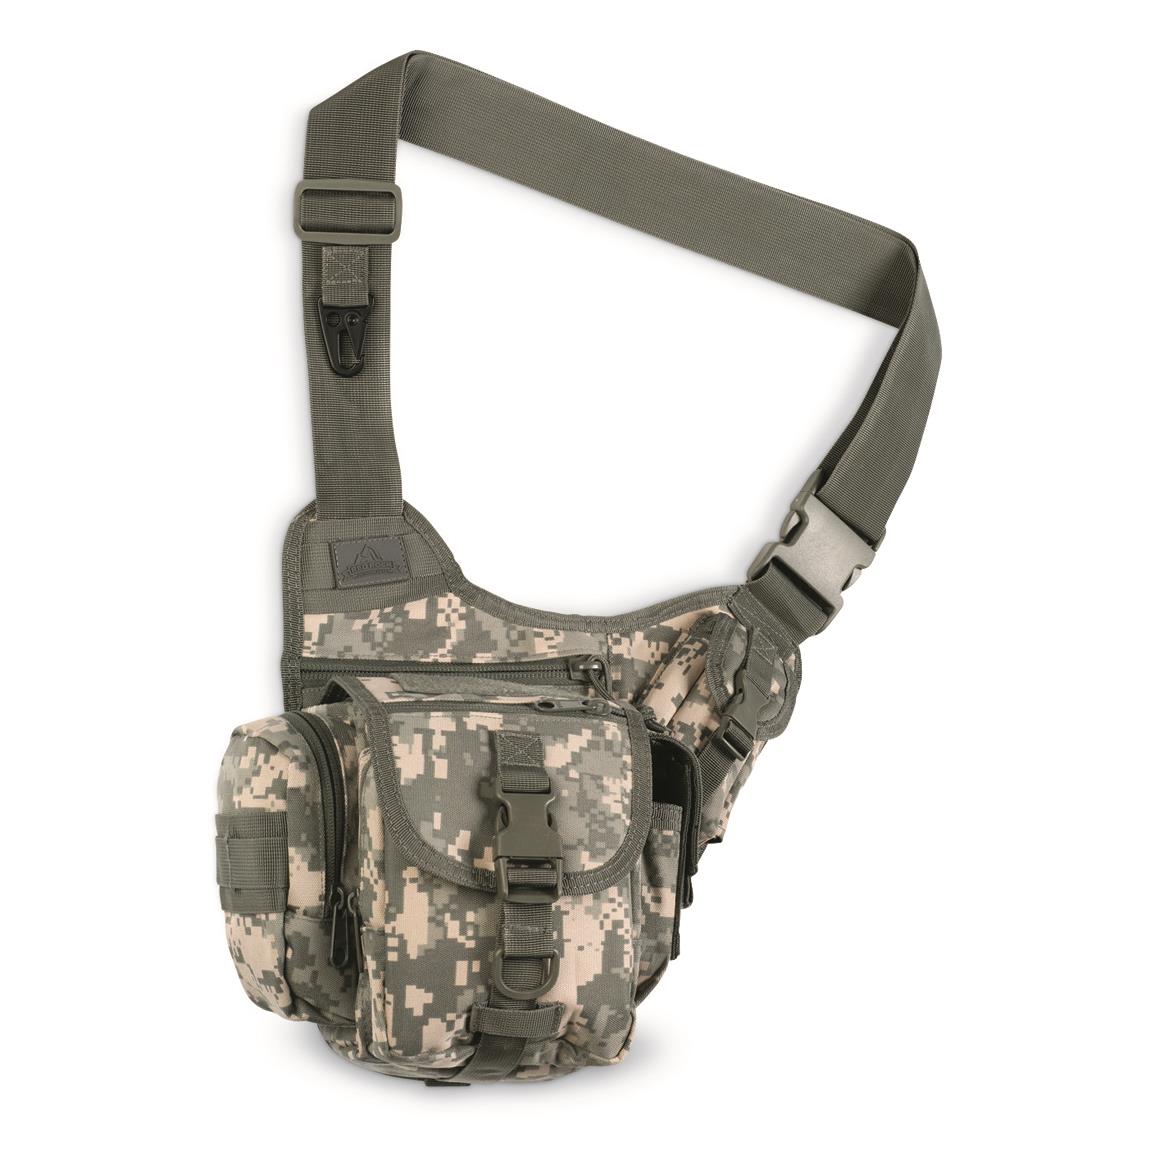 Red Rock Military-style Sidekick Sling Bag - 182447, Military Style ...